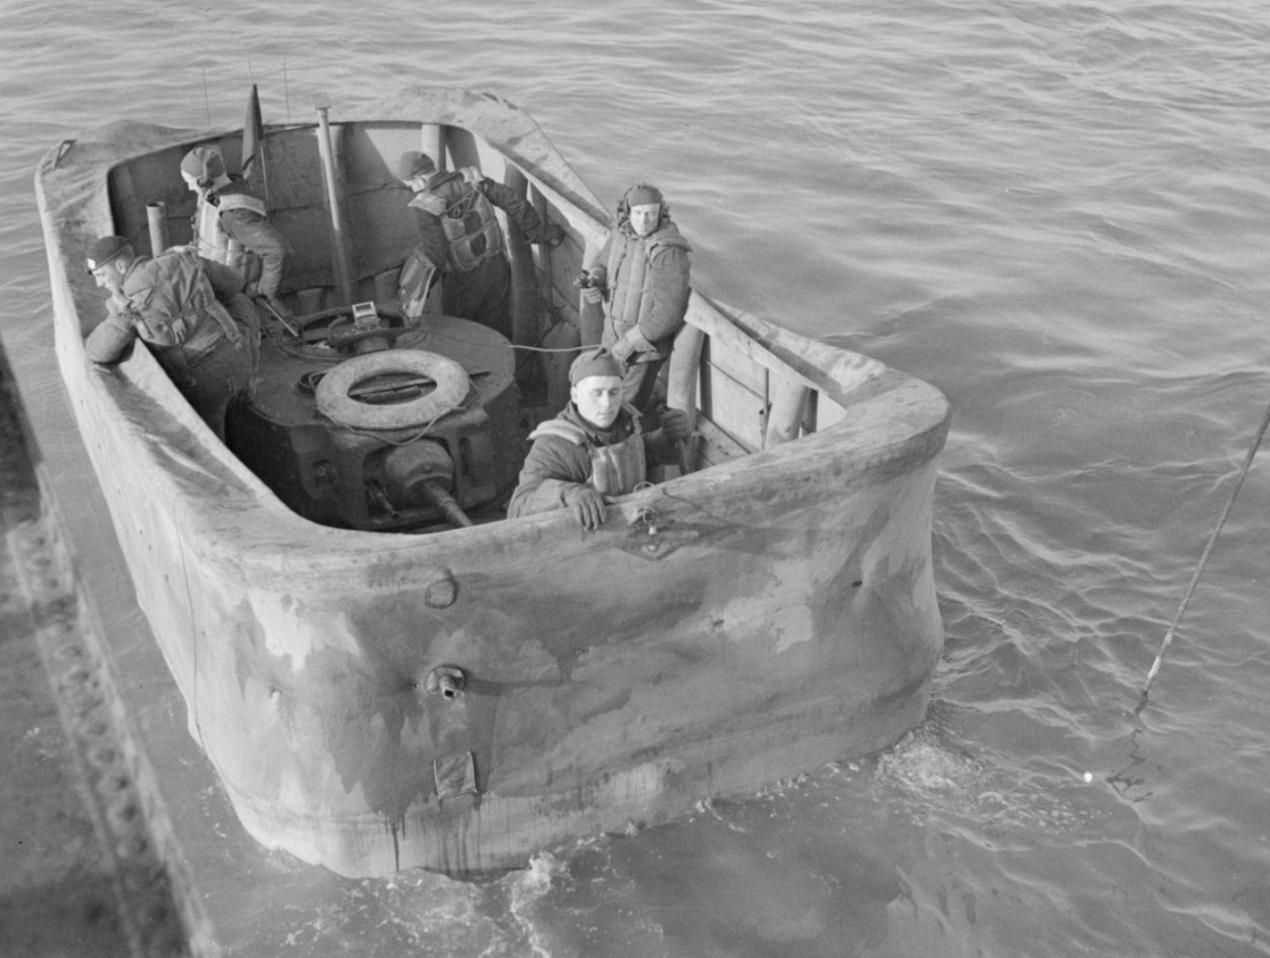 Valentine DD tank with screen erected, in the water alongside a landing craft